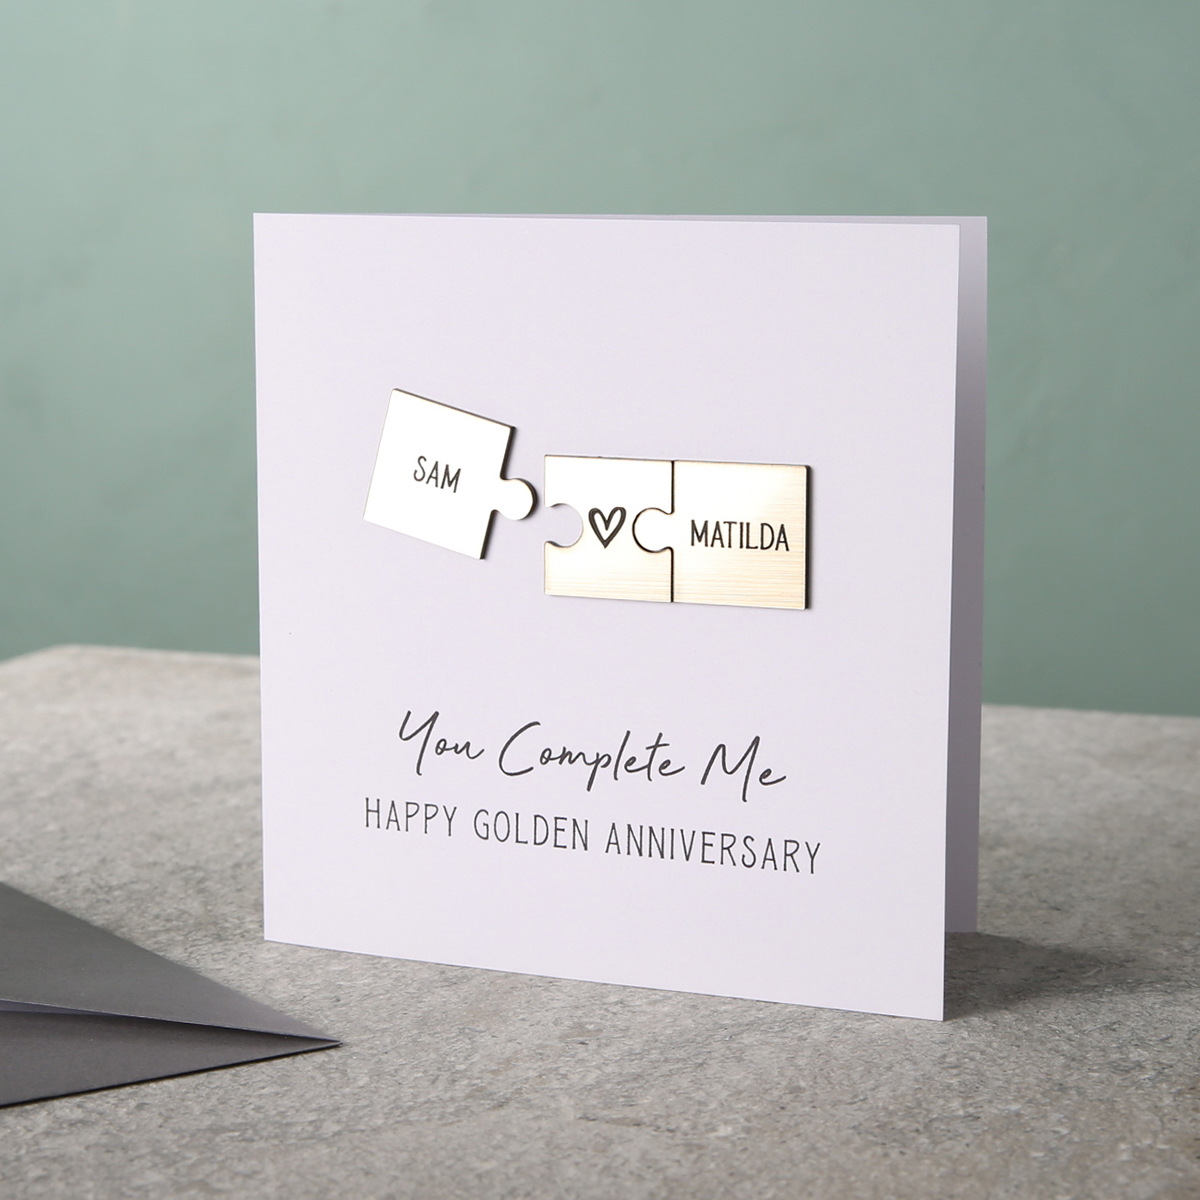 Personalised Metallic Puzzle Card - You Complete Me